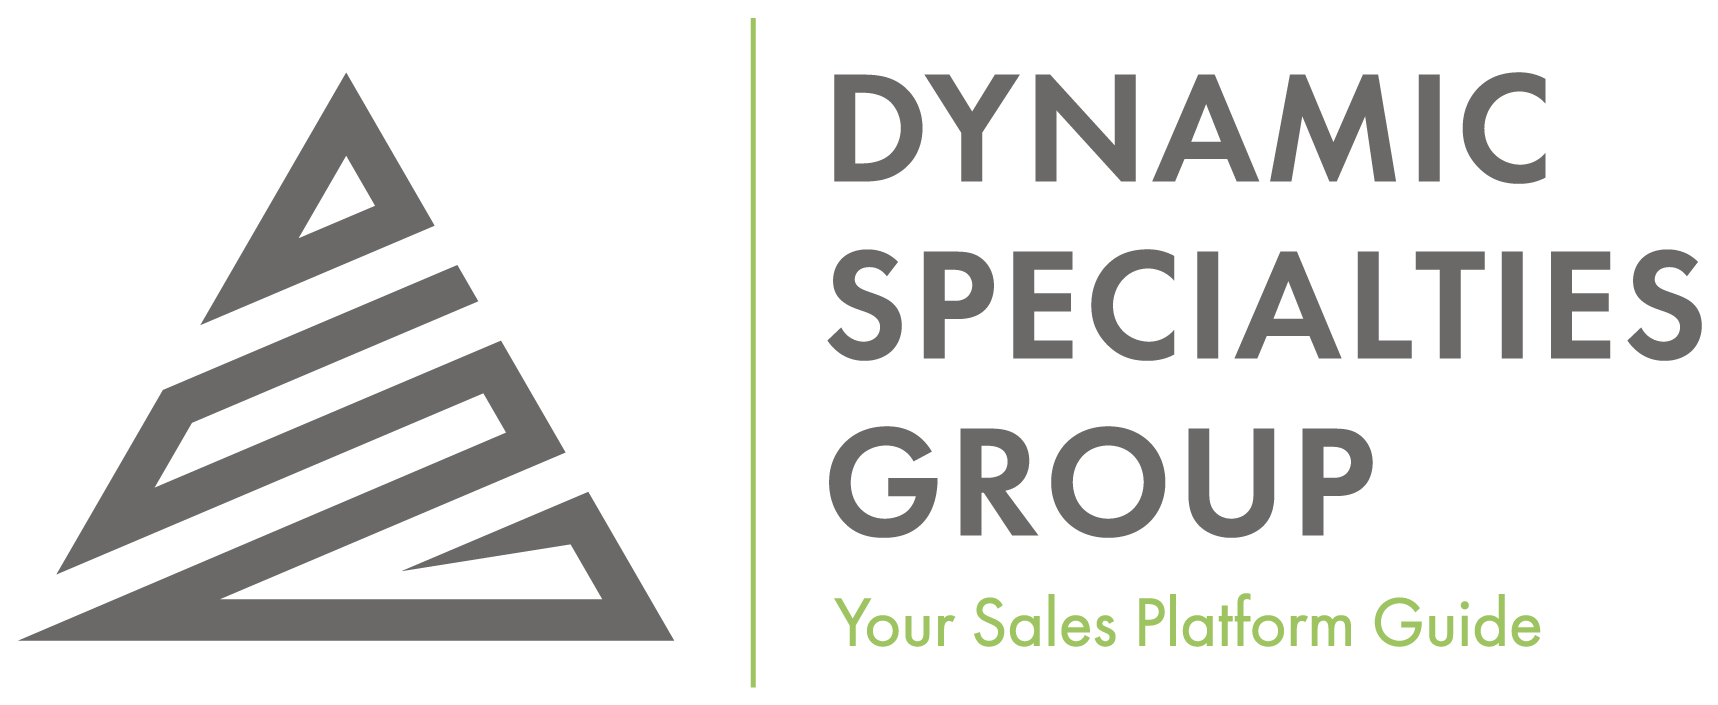 Dynamic Specialties Group Your Sales Platform Guide Logo